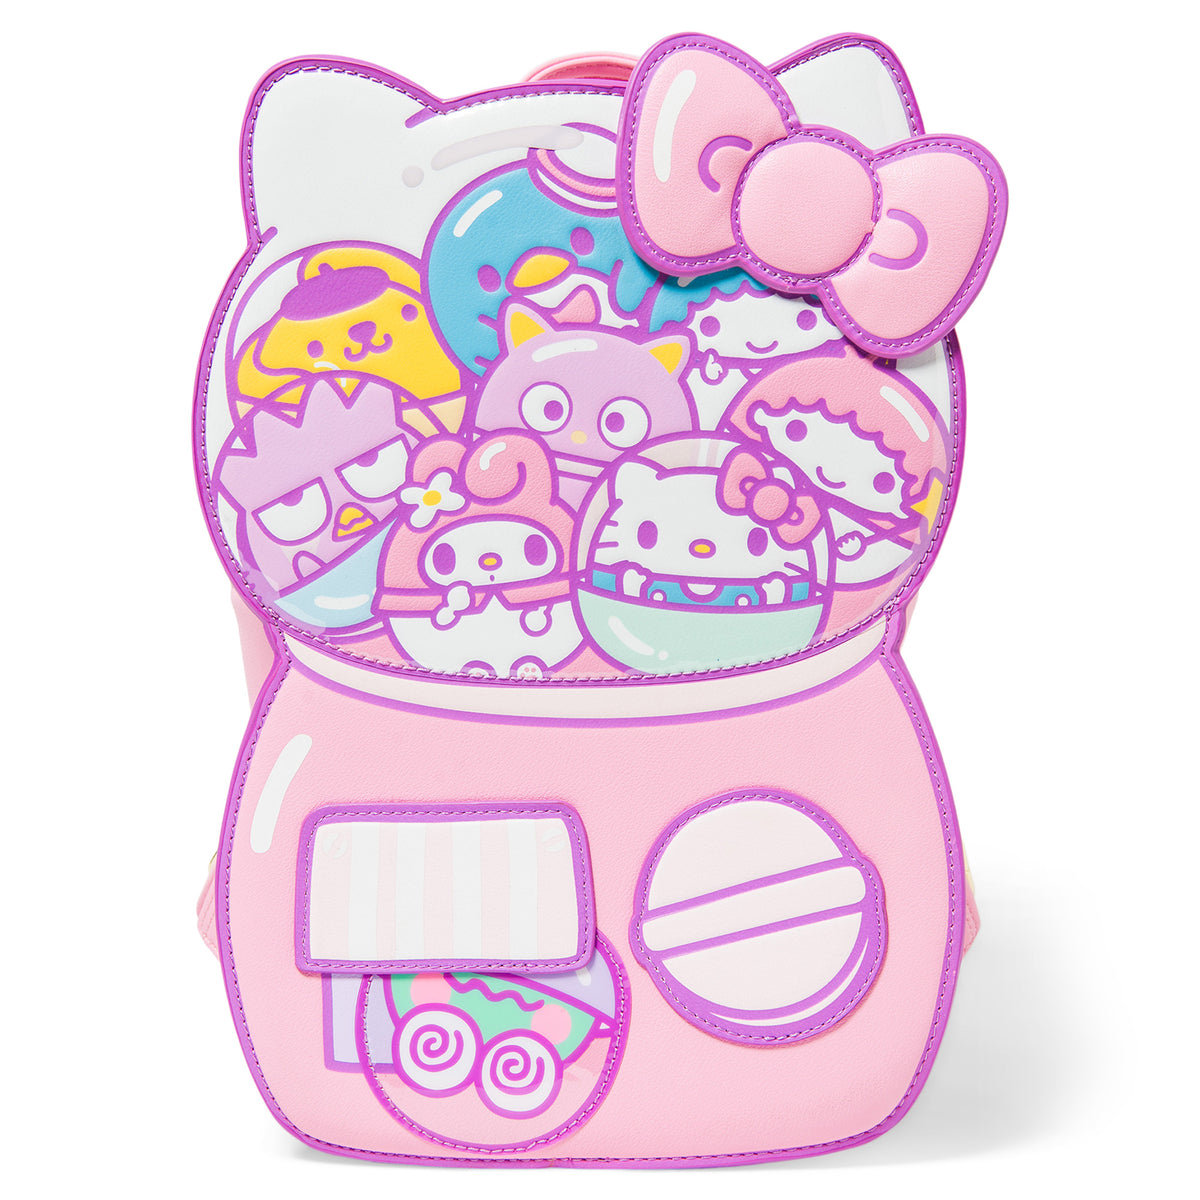 Hello Kitty and Friends x Loungefly Gumball Machine Mini Backpack Bags Loungefly   